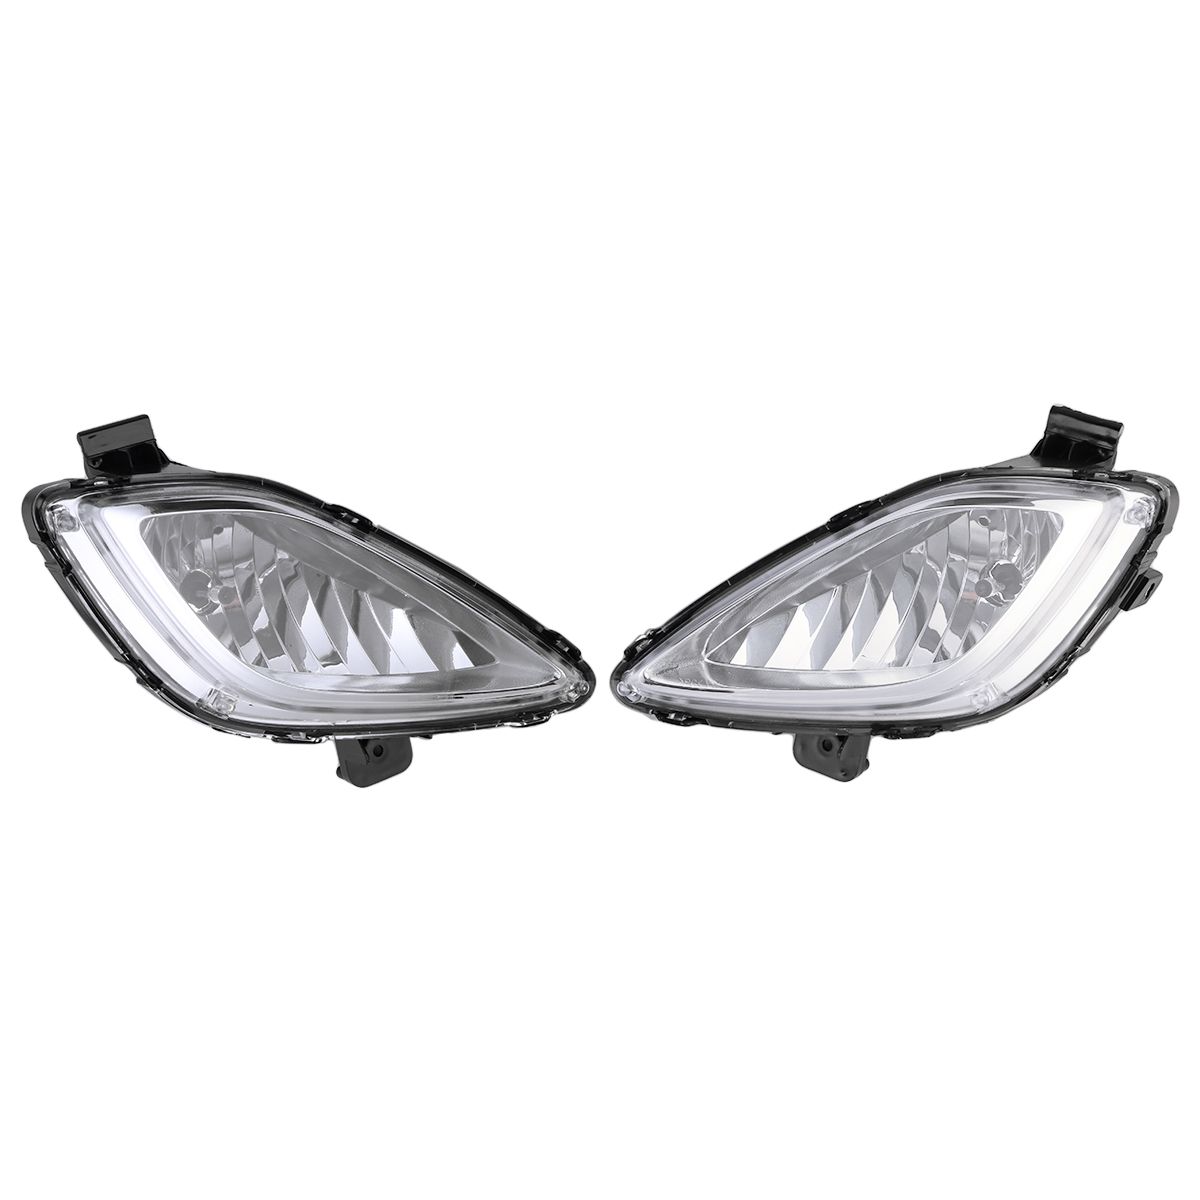 A-Pair-Left-Right-Clear-Front-Bumper-Car-Fog-Lights-Lamps-For-Hyundai-Elantra-2011-2013-1280884